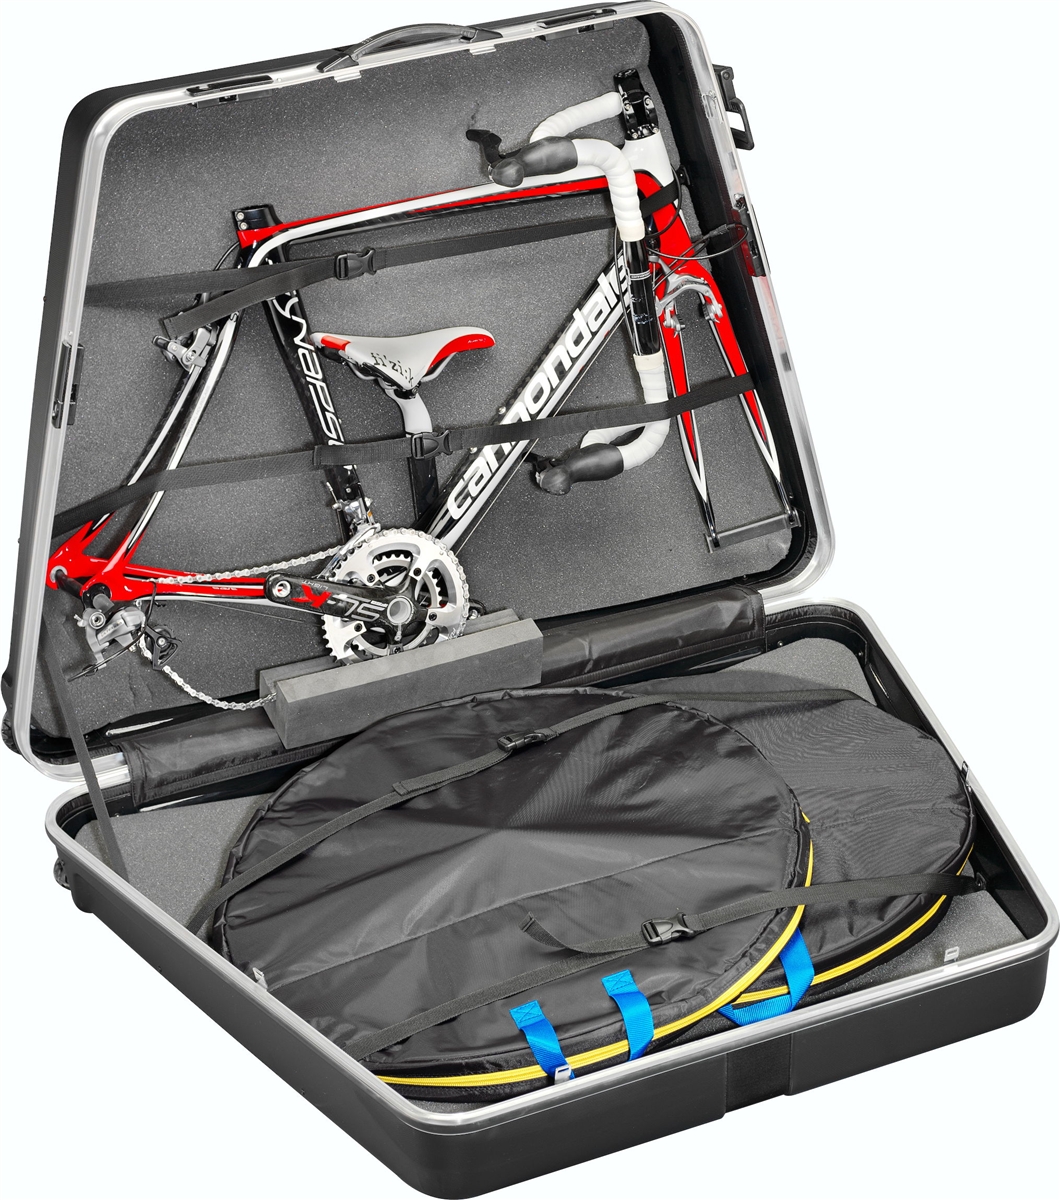 BLACK Team Bike Case (formerly Performance) Bicycle Transport with wheels